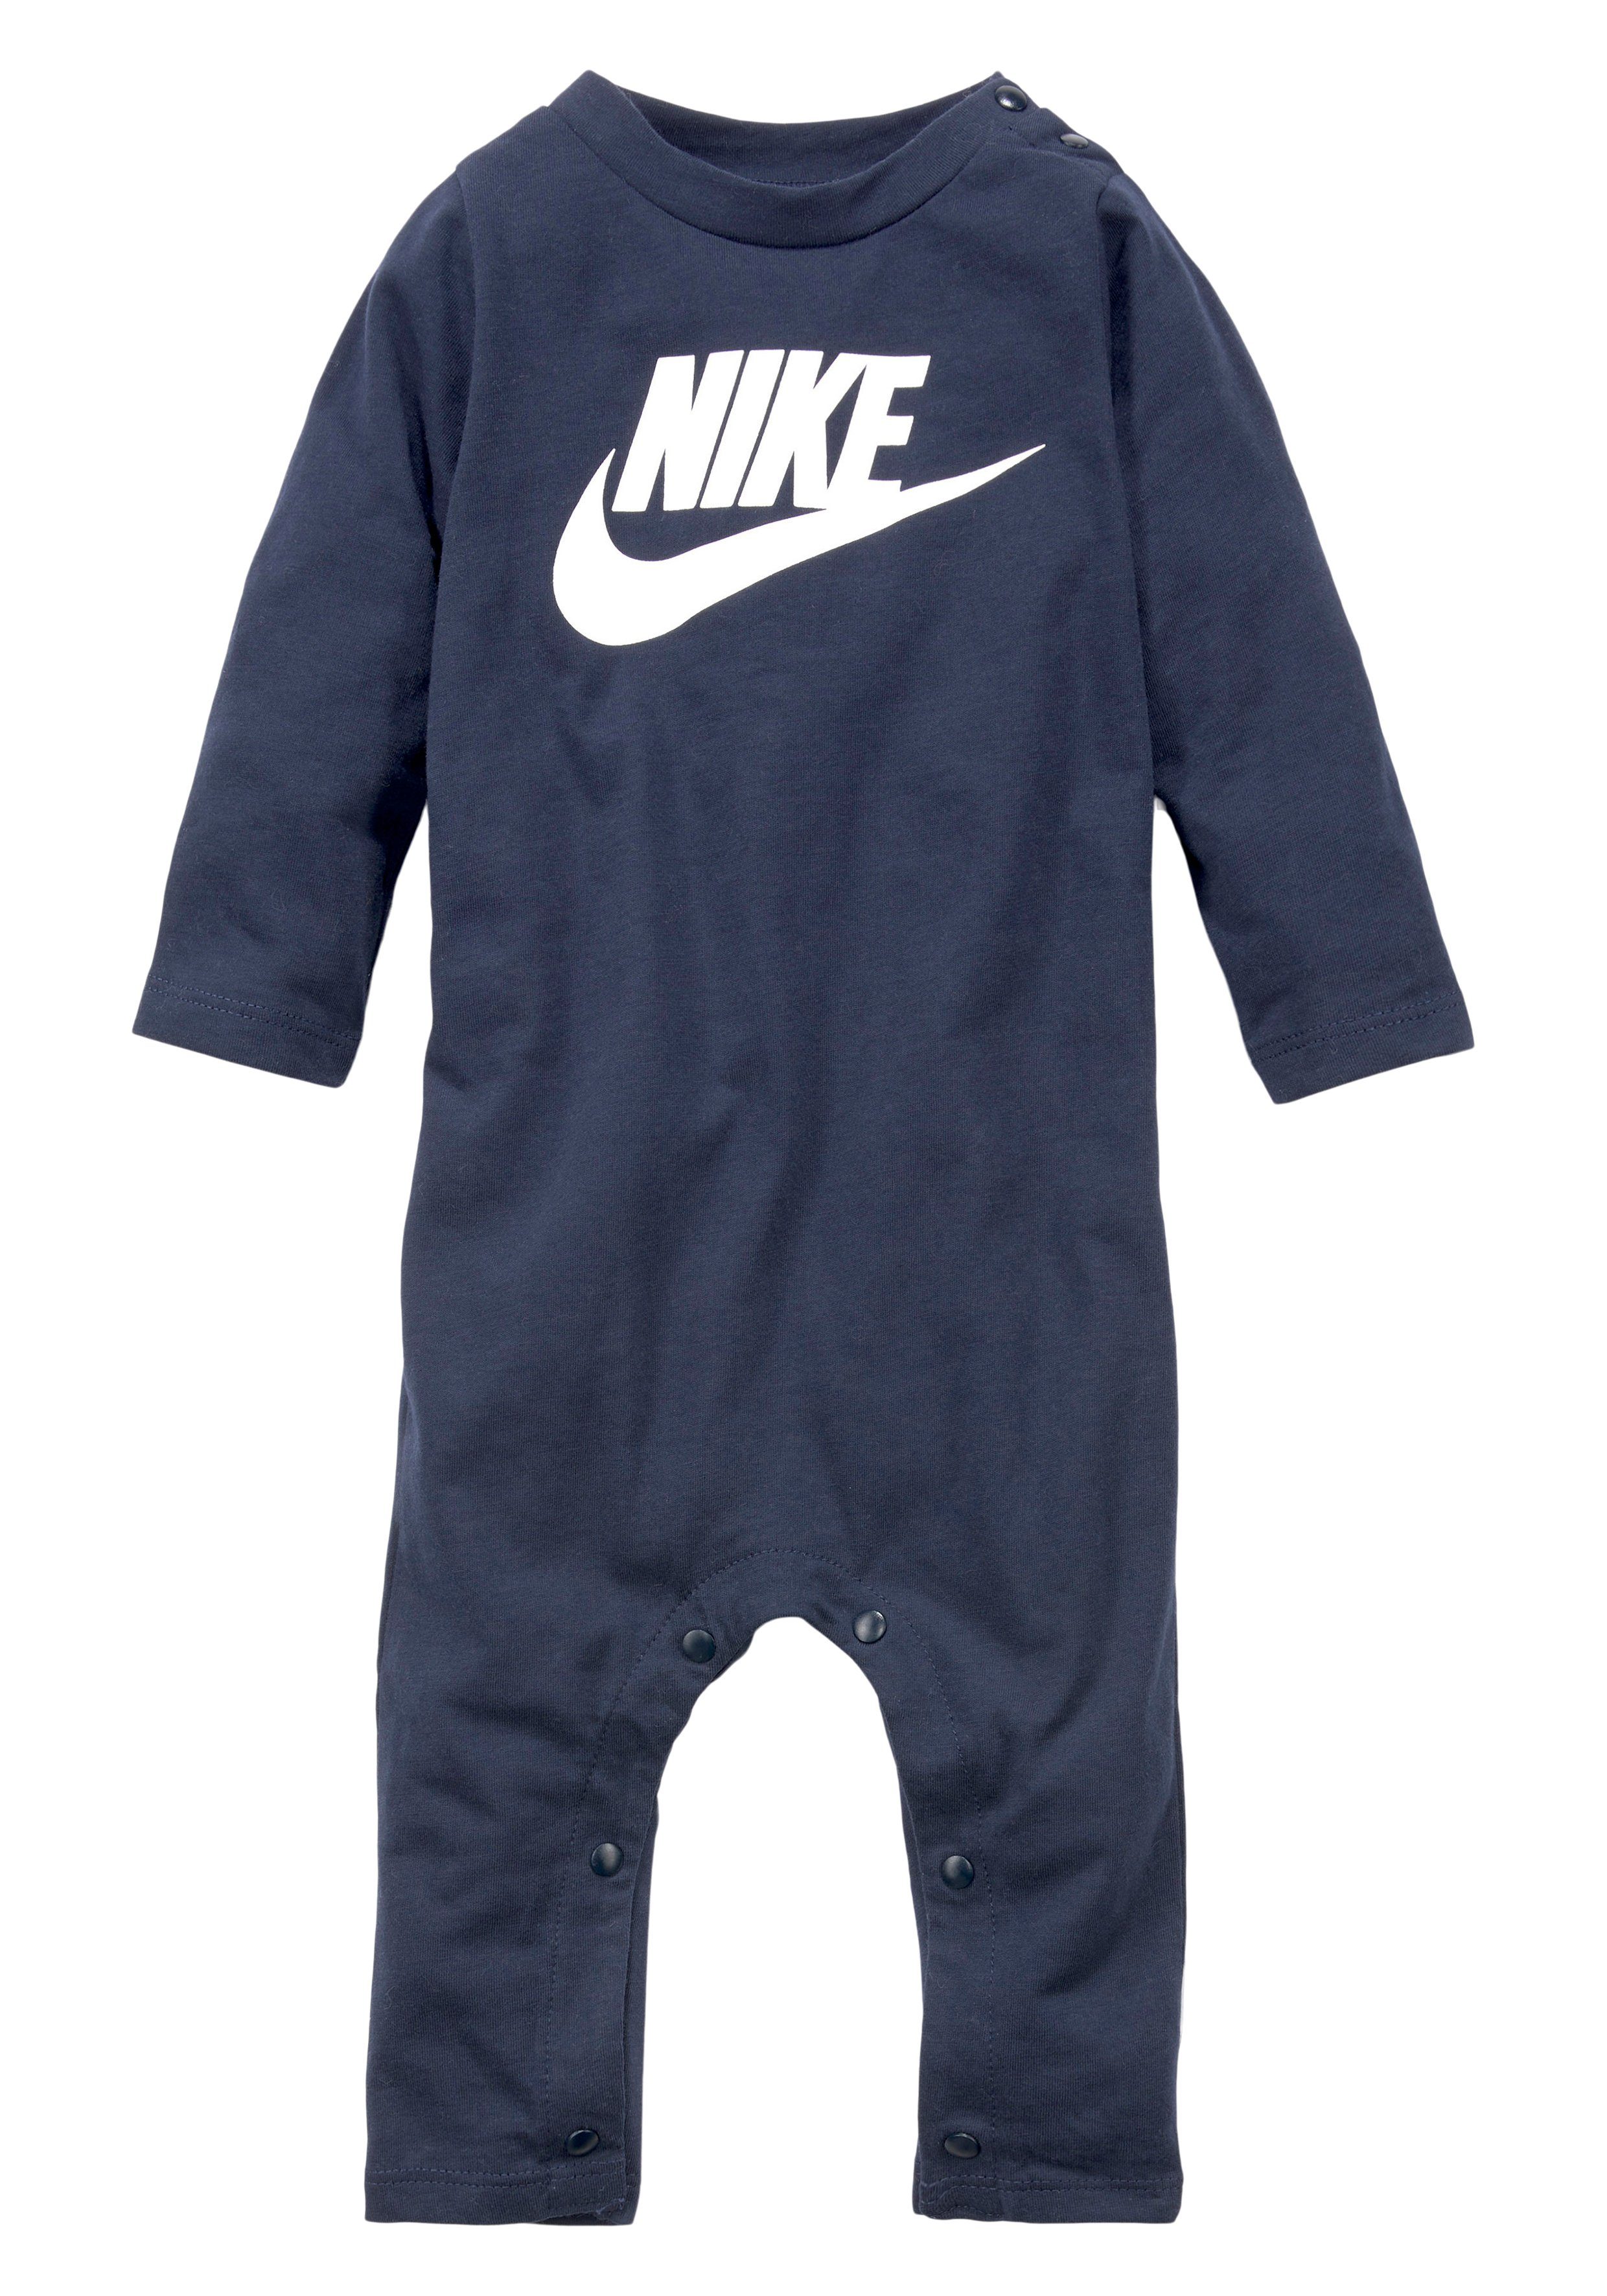 Nike Sportswear Strampler COVERALL, NON-FOOTED von Nike Strampler HBR Sportswear